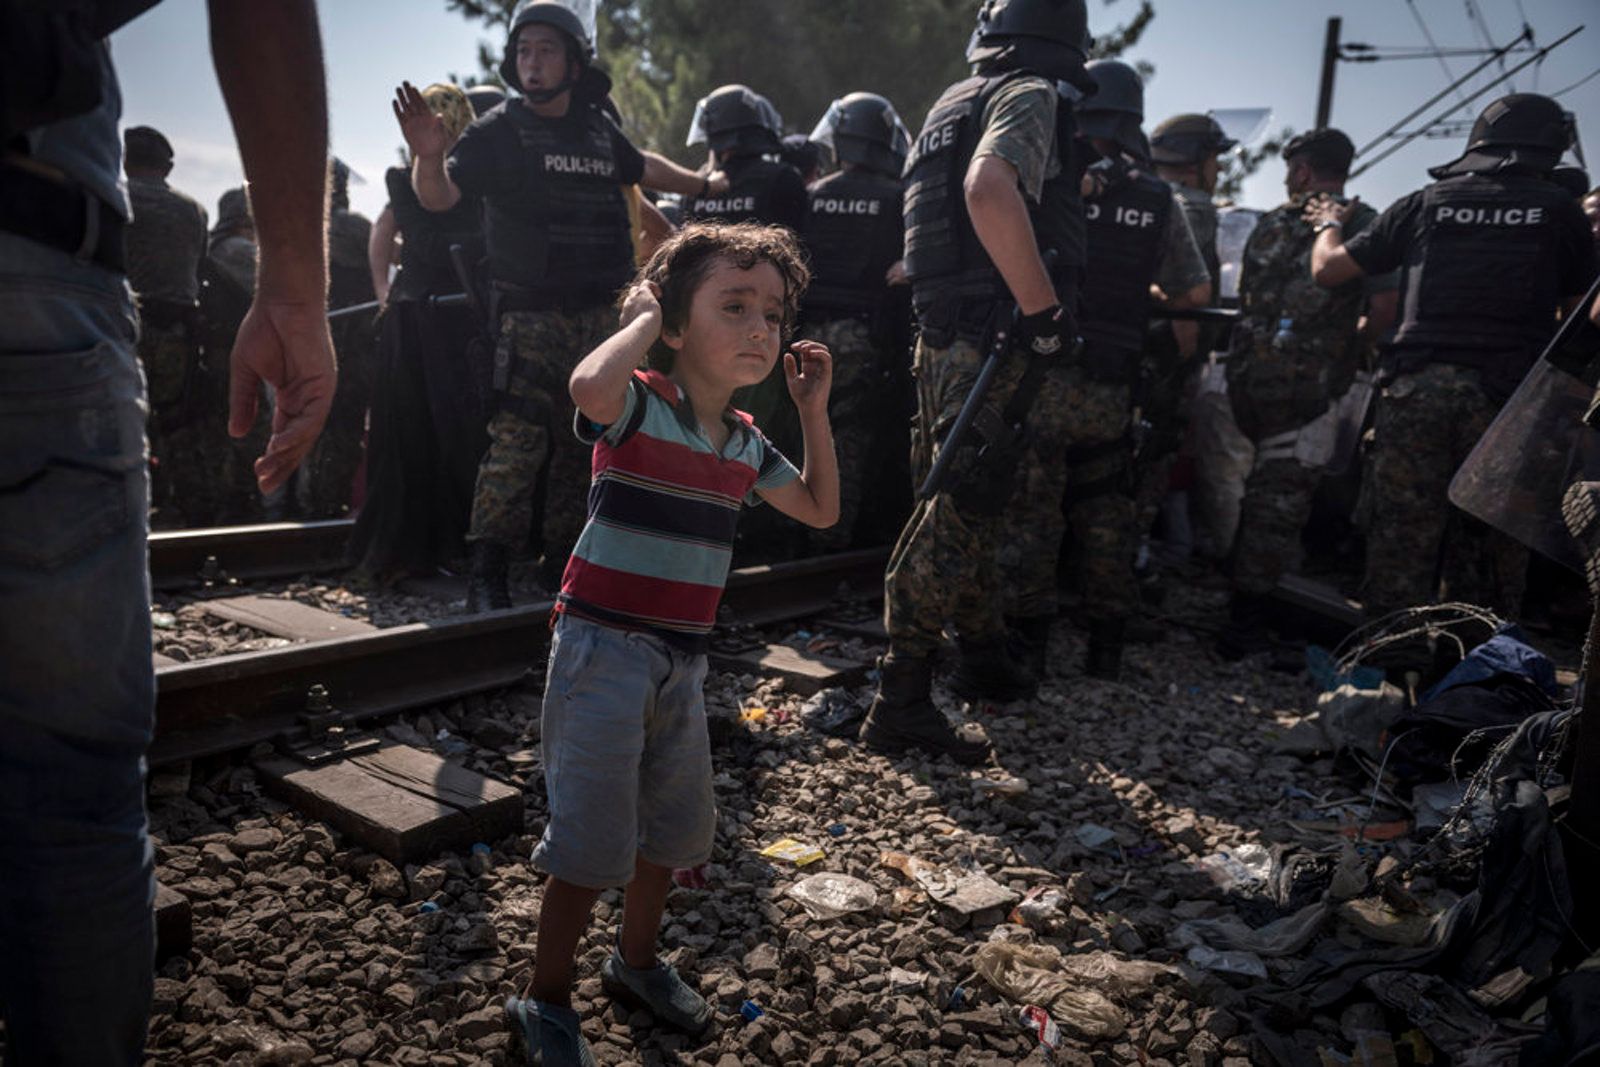 © Sergey Ponomarev - Image from the Exodus: A Long Way Home photography project